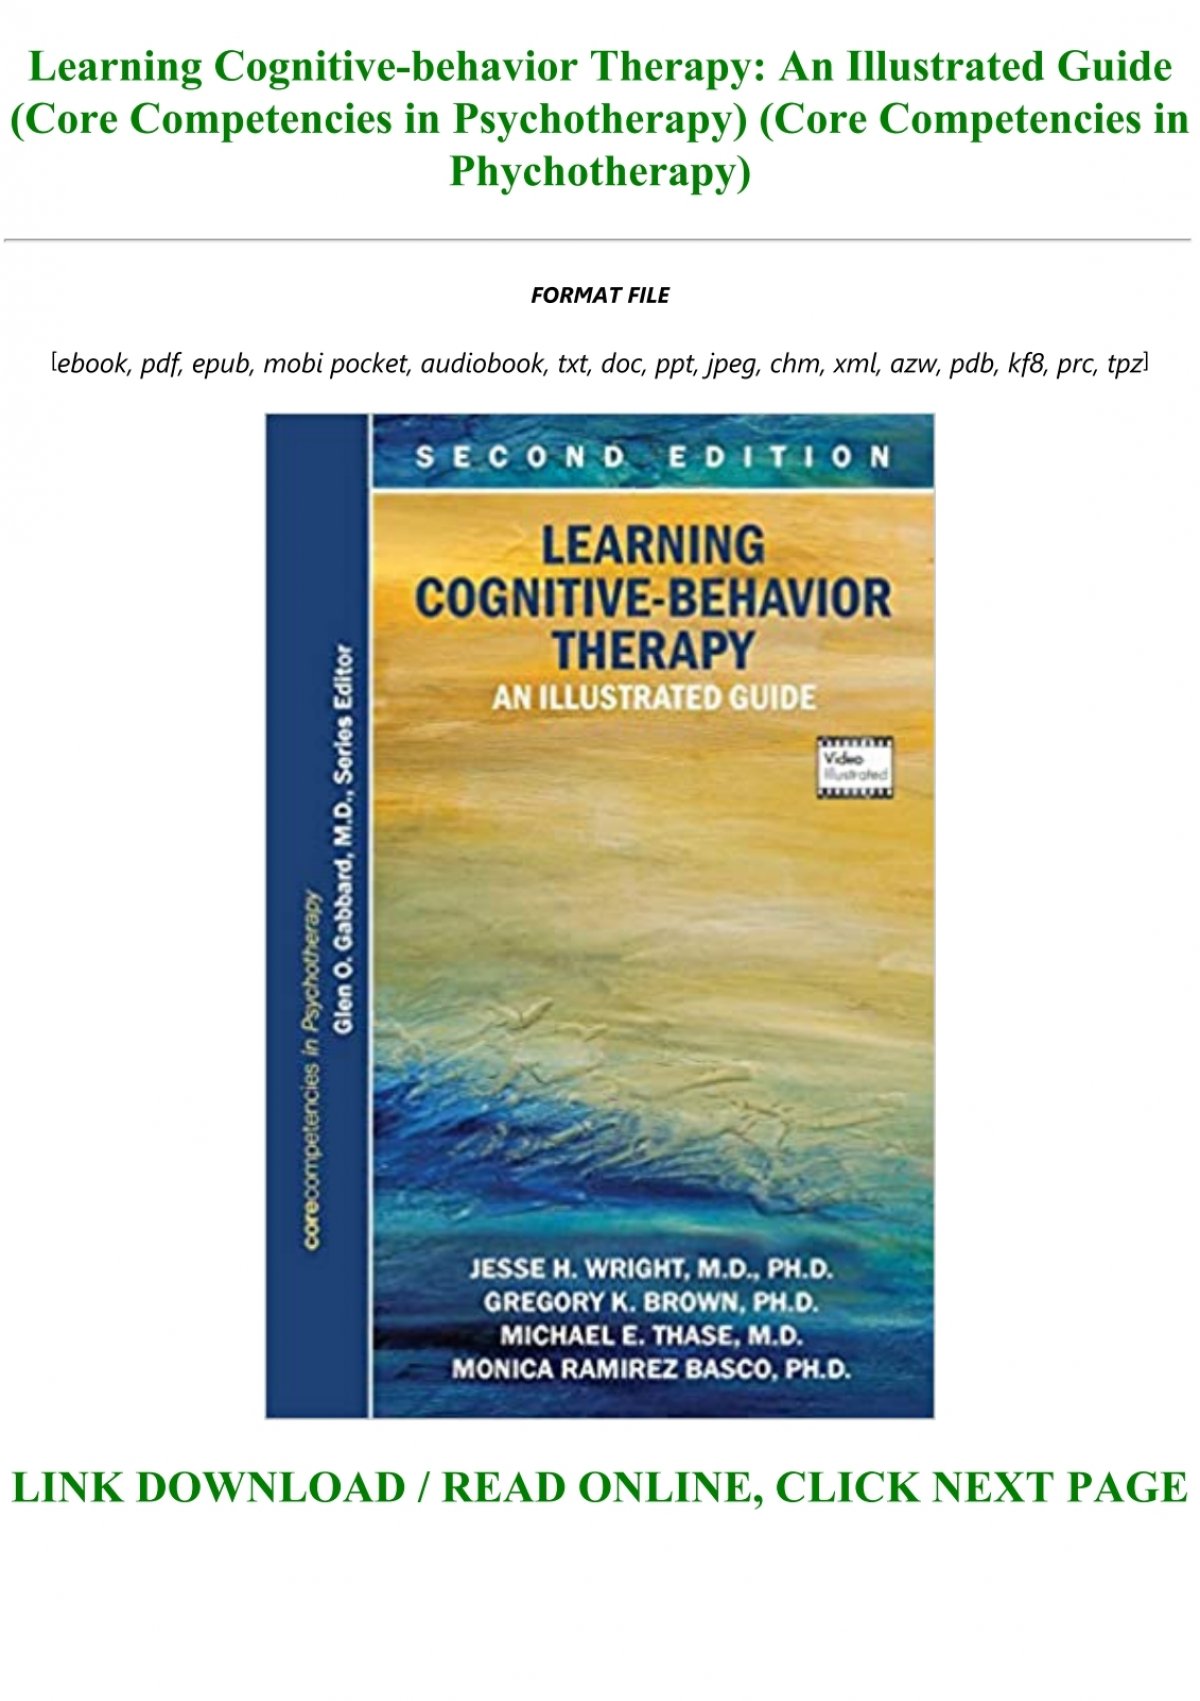 learning cognitive-behavior therapy an illustrated guide free download